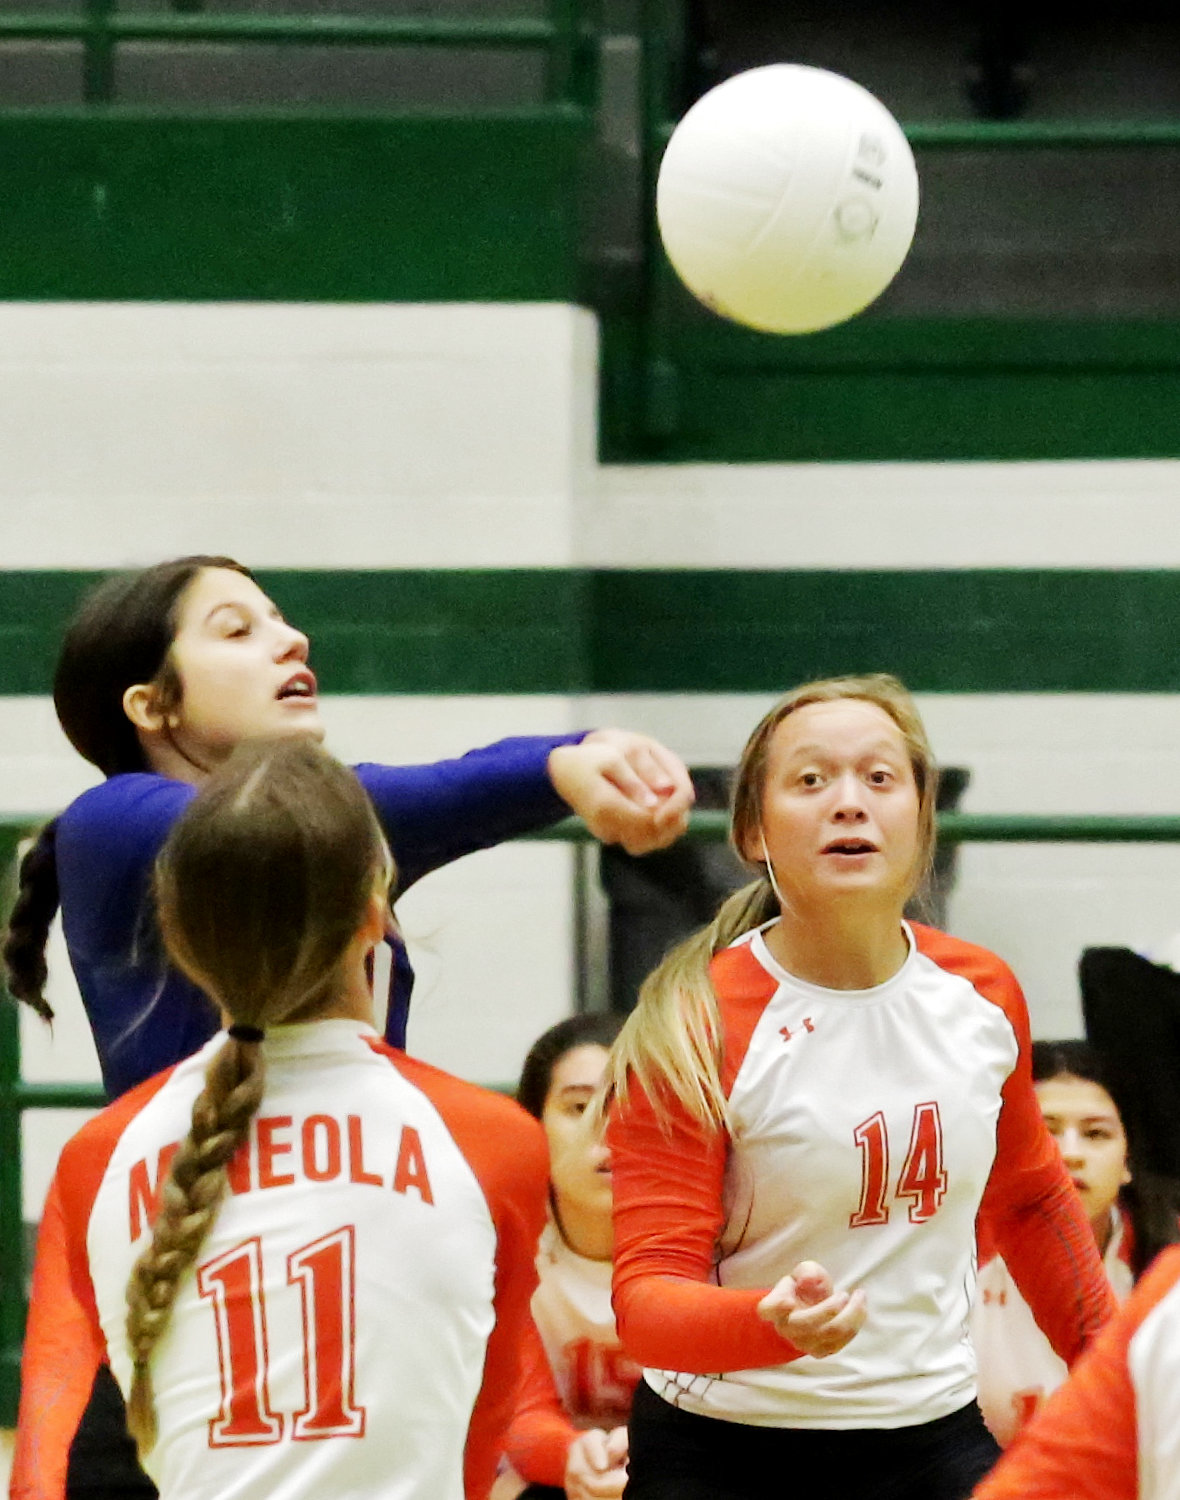 Kenleigh Aguirre makes a play on the ball between Lady Jackets Olivia Hughes (left) and Riley Weekly.